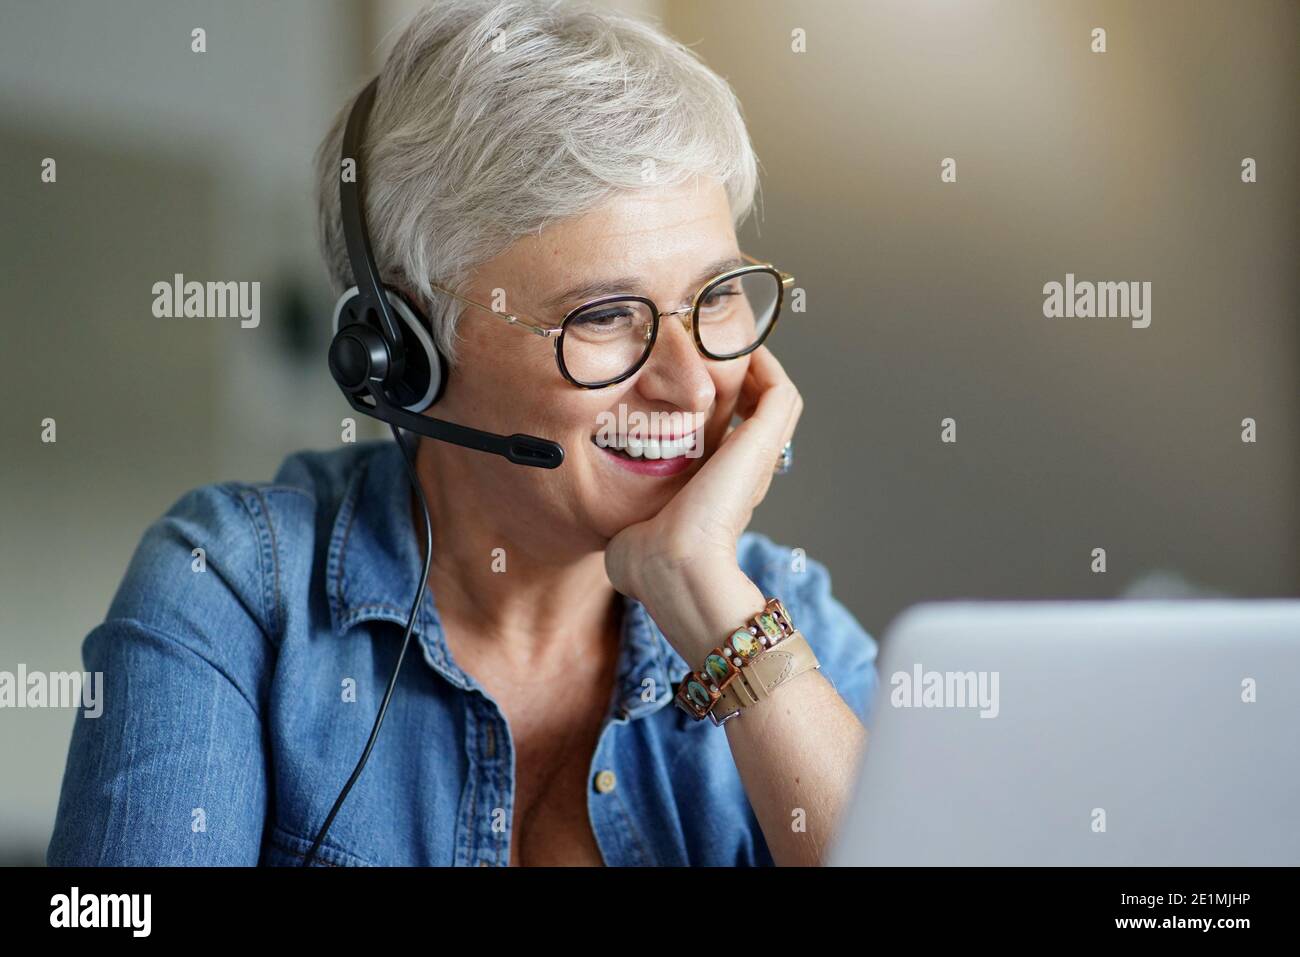 Mature woman with grey short hair working from home during pandemia Stock Photo